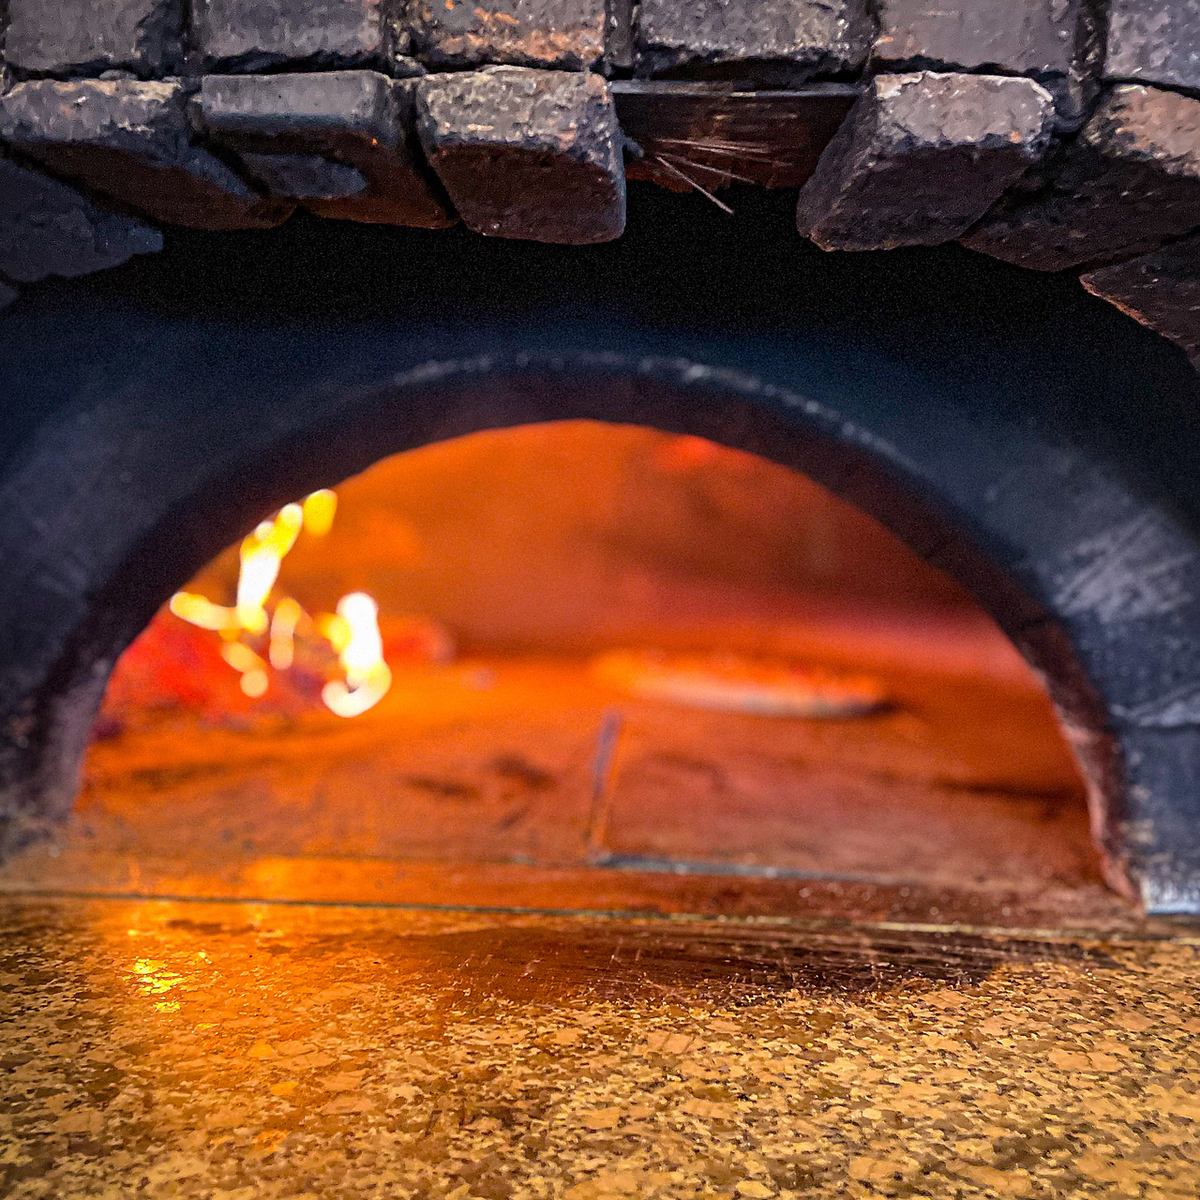 Authentic stone oven pizza is our specialty!